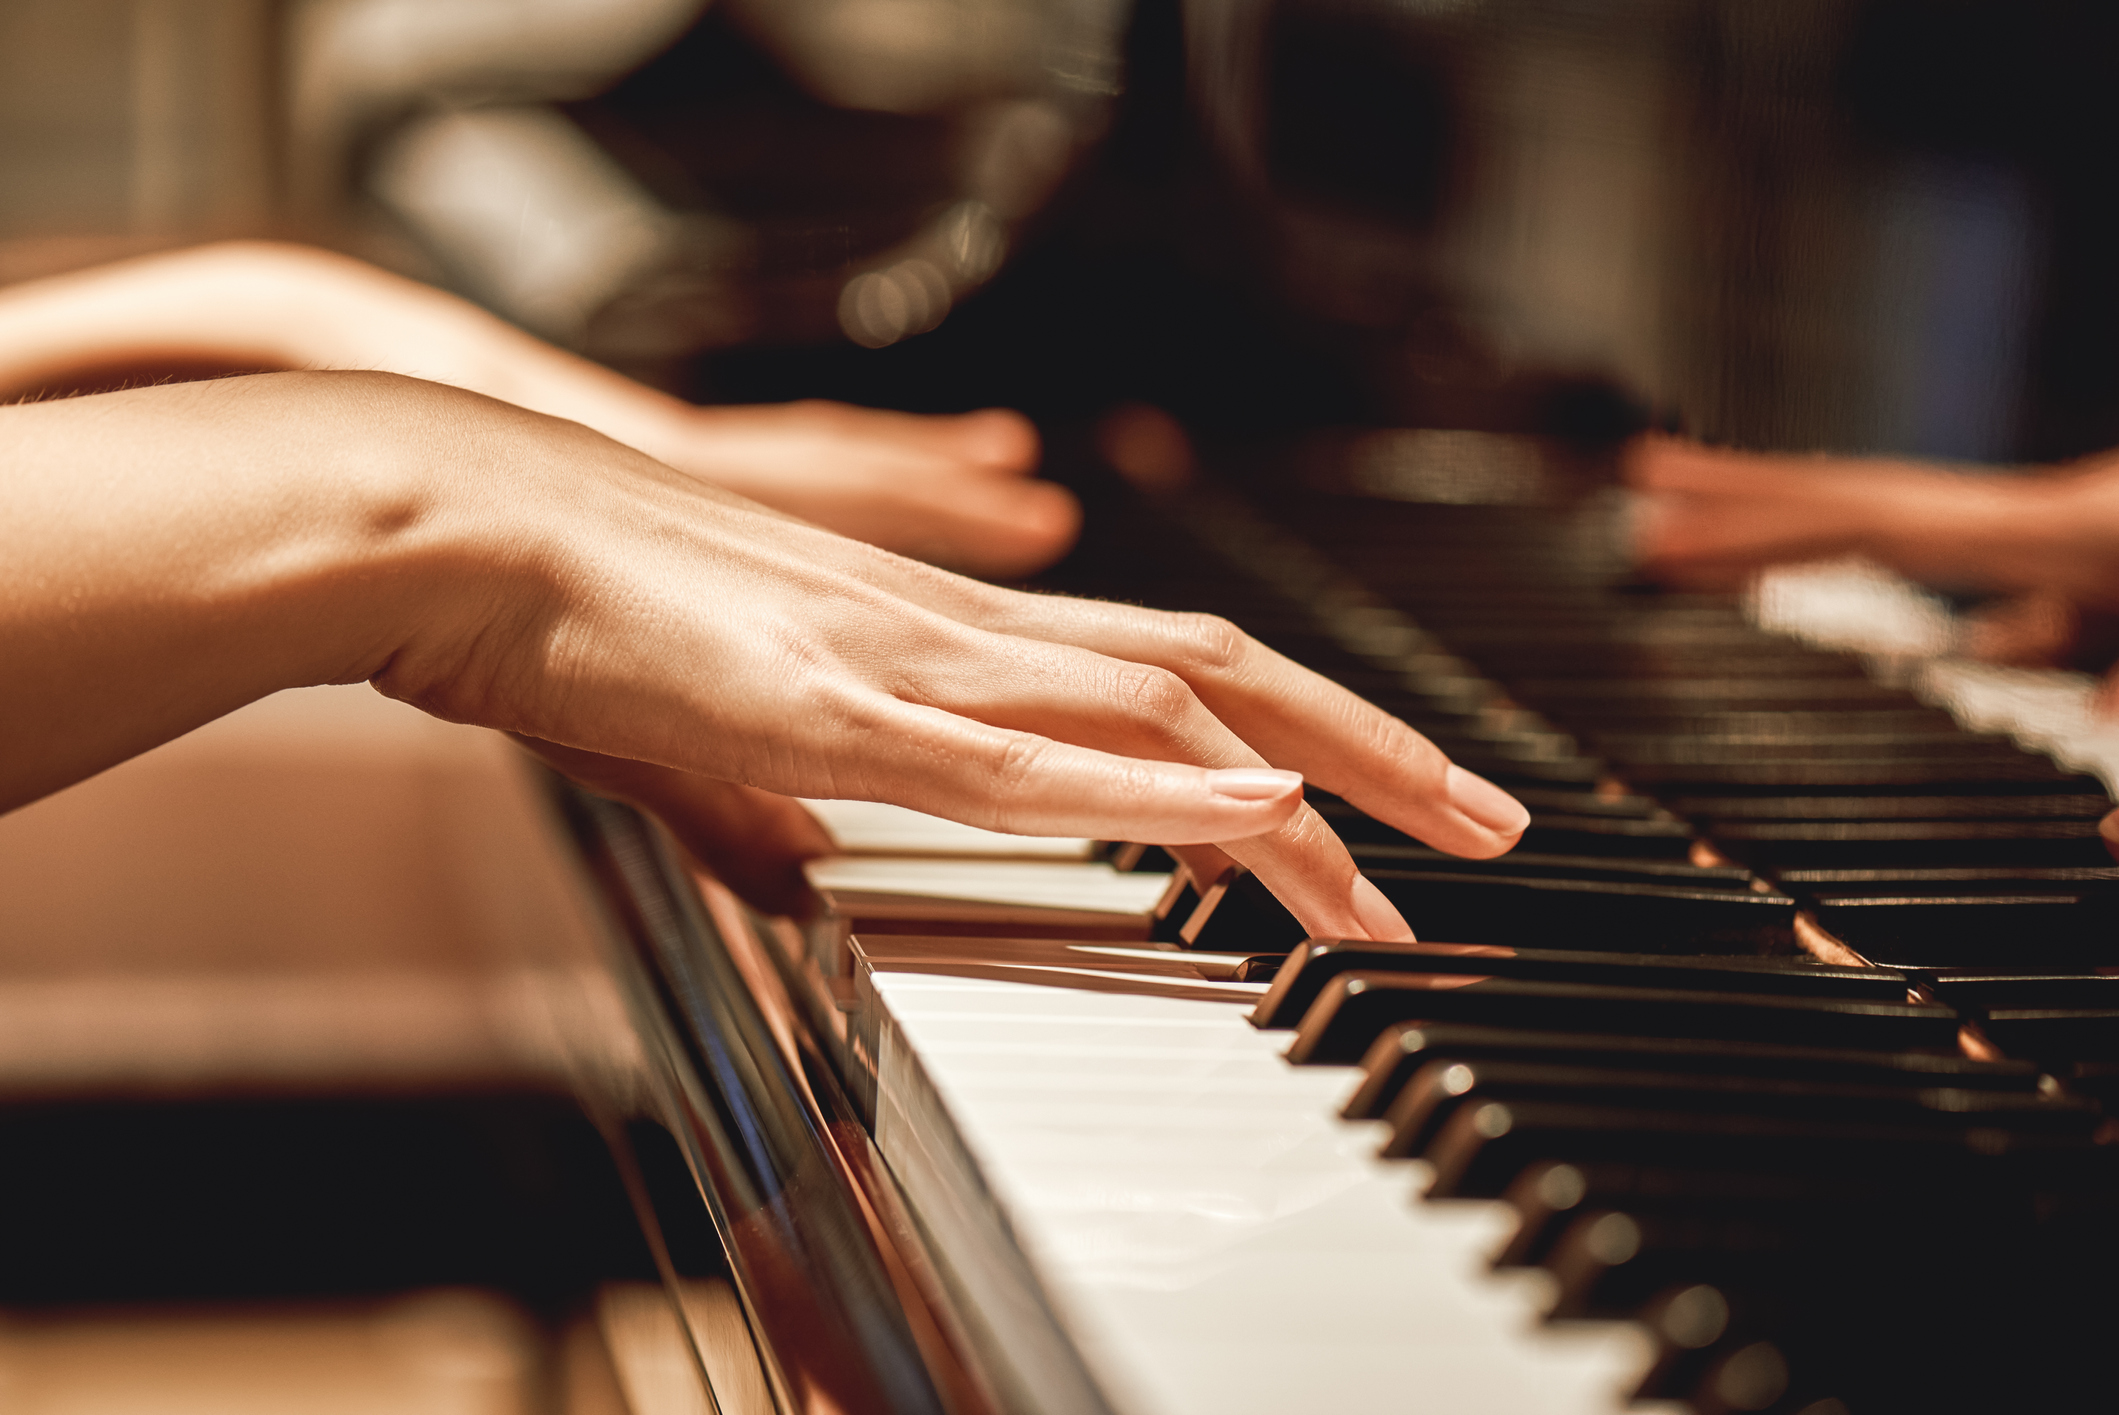 Playing music boosts brain ability